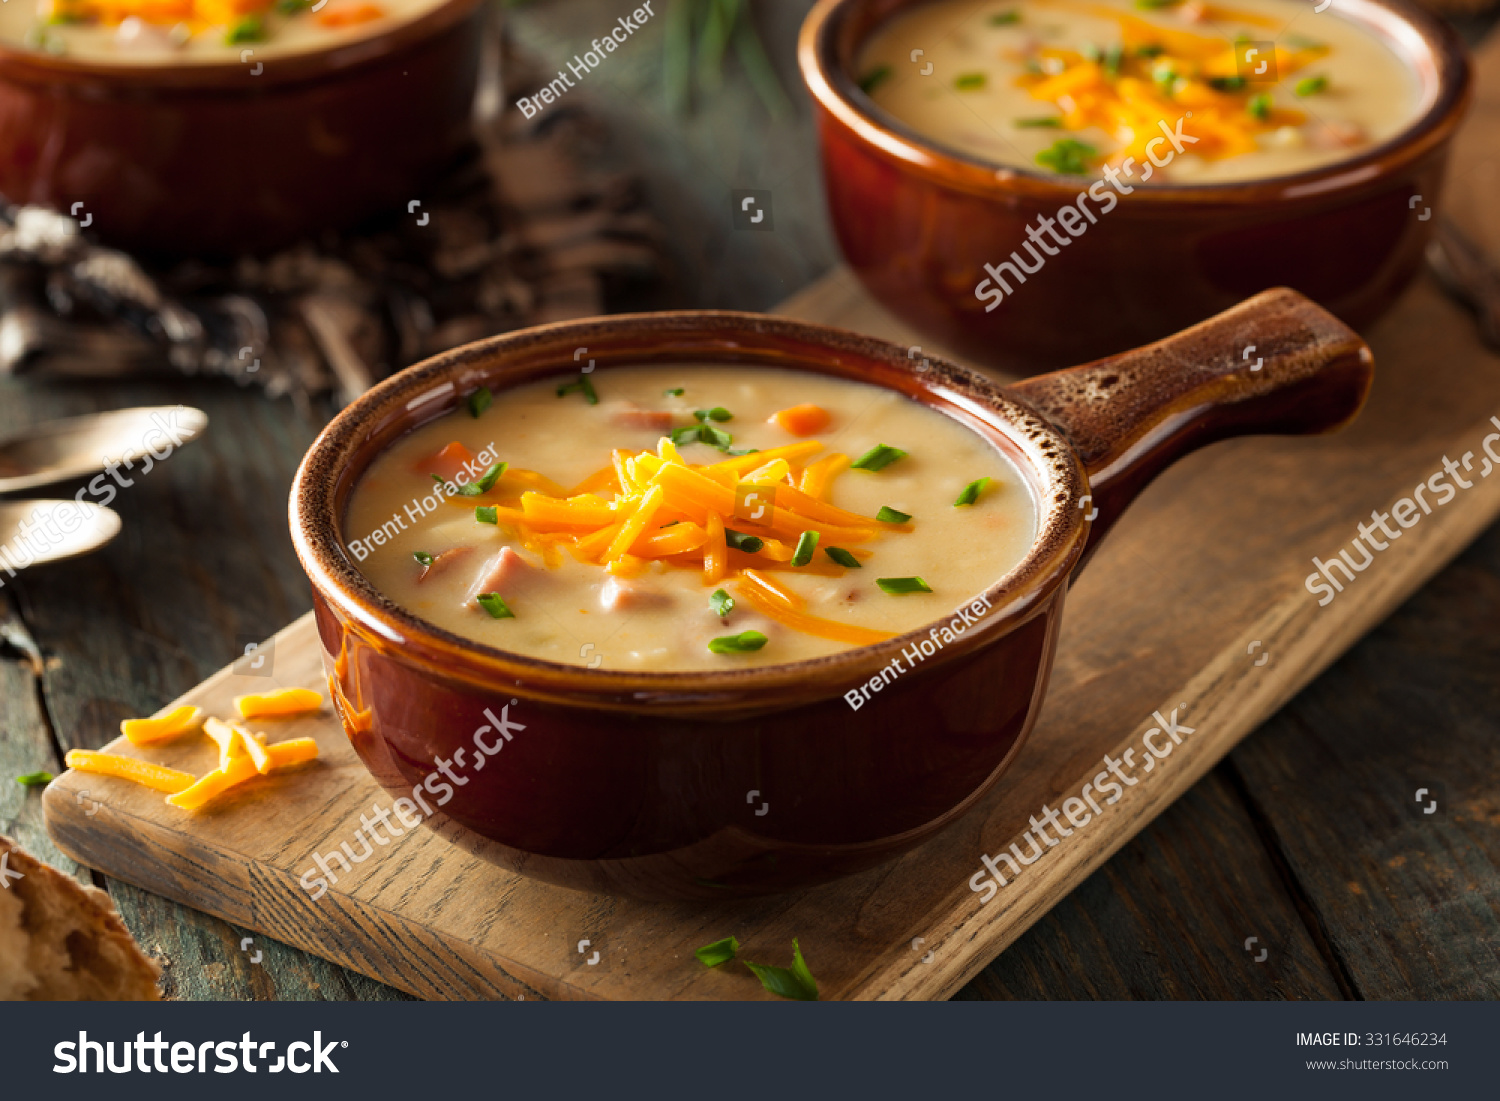 Homemade Beer Cheese Soup with Chives and Bread #331646234